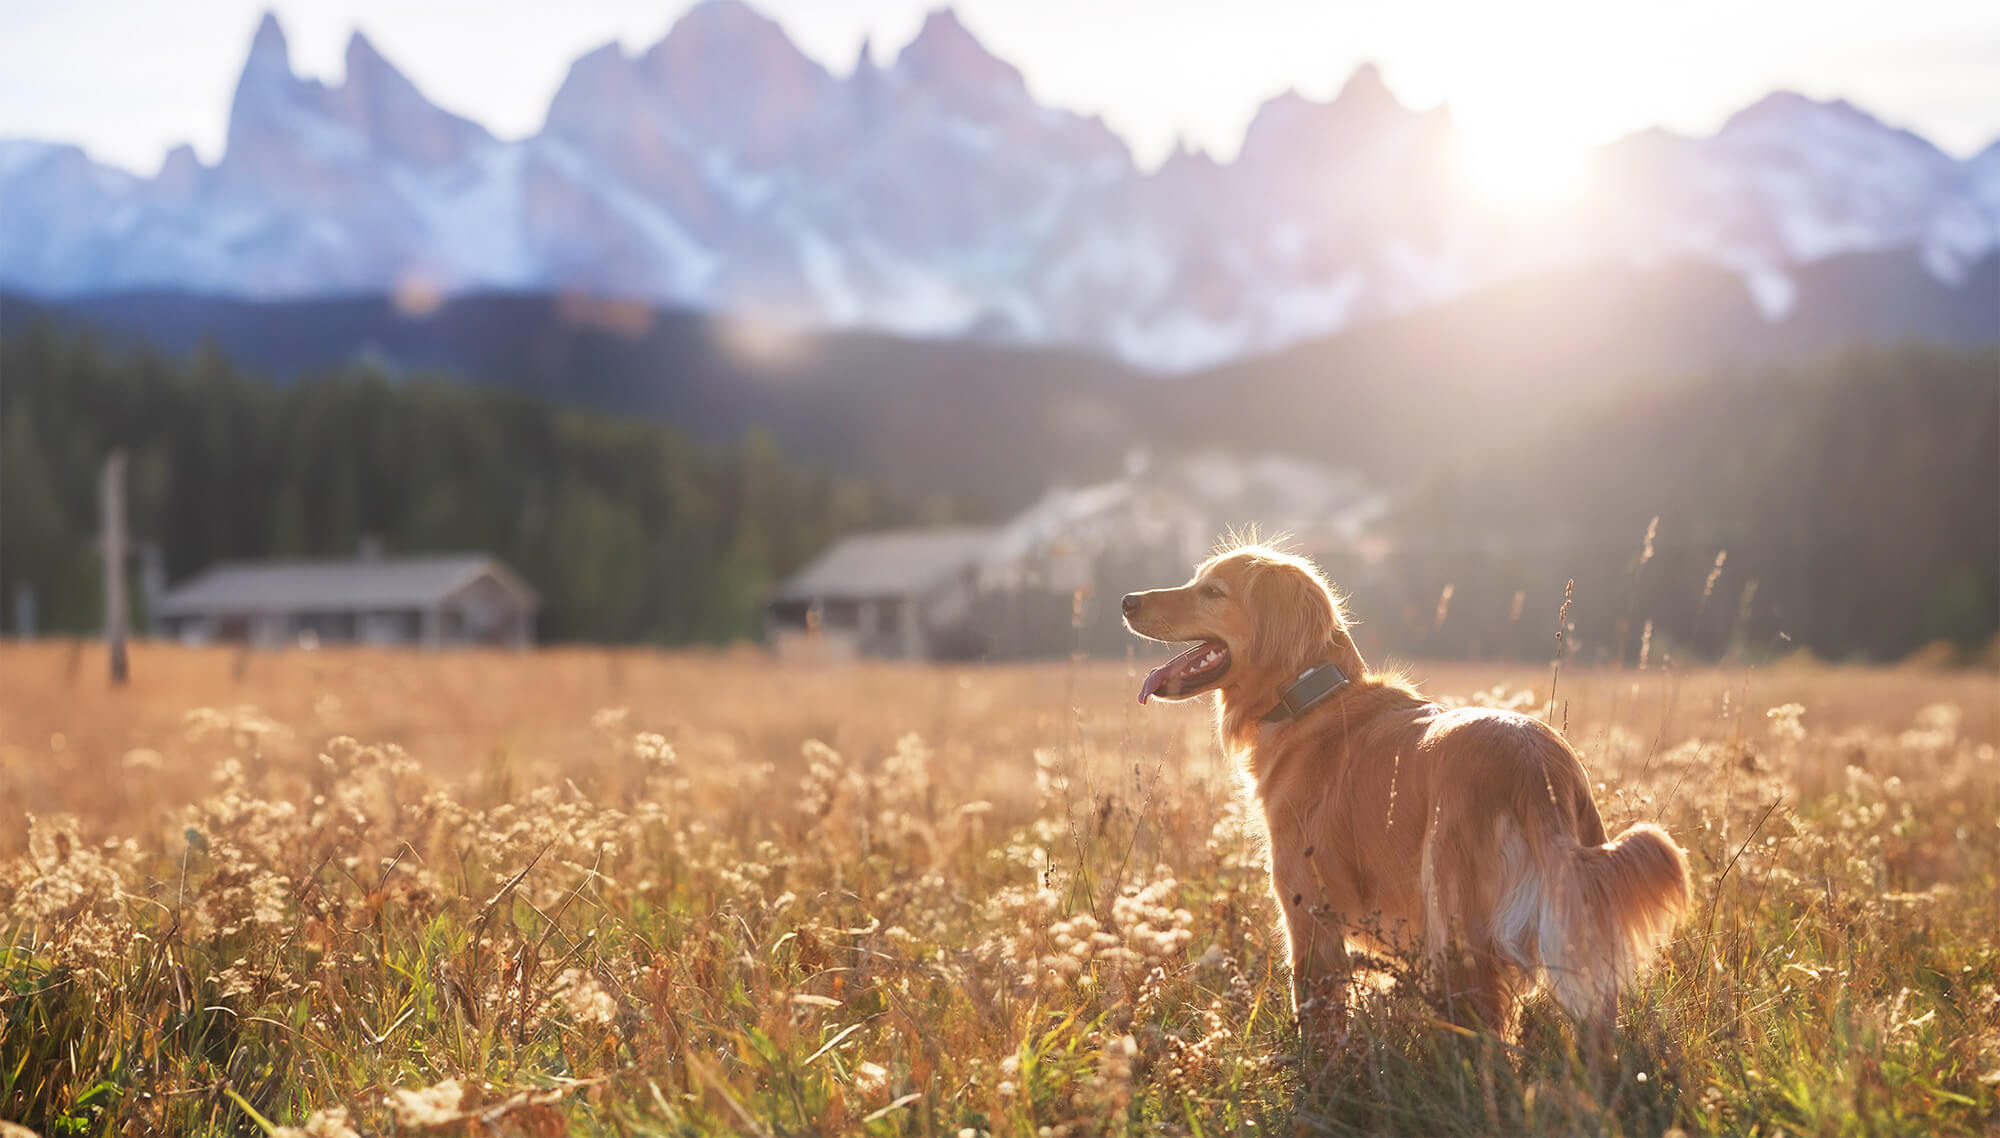 Golden Retriever wearing a Heel training collar standing in field in front of mountains